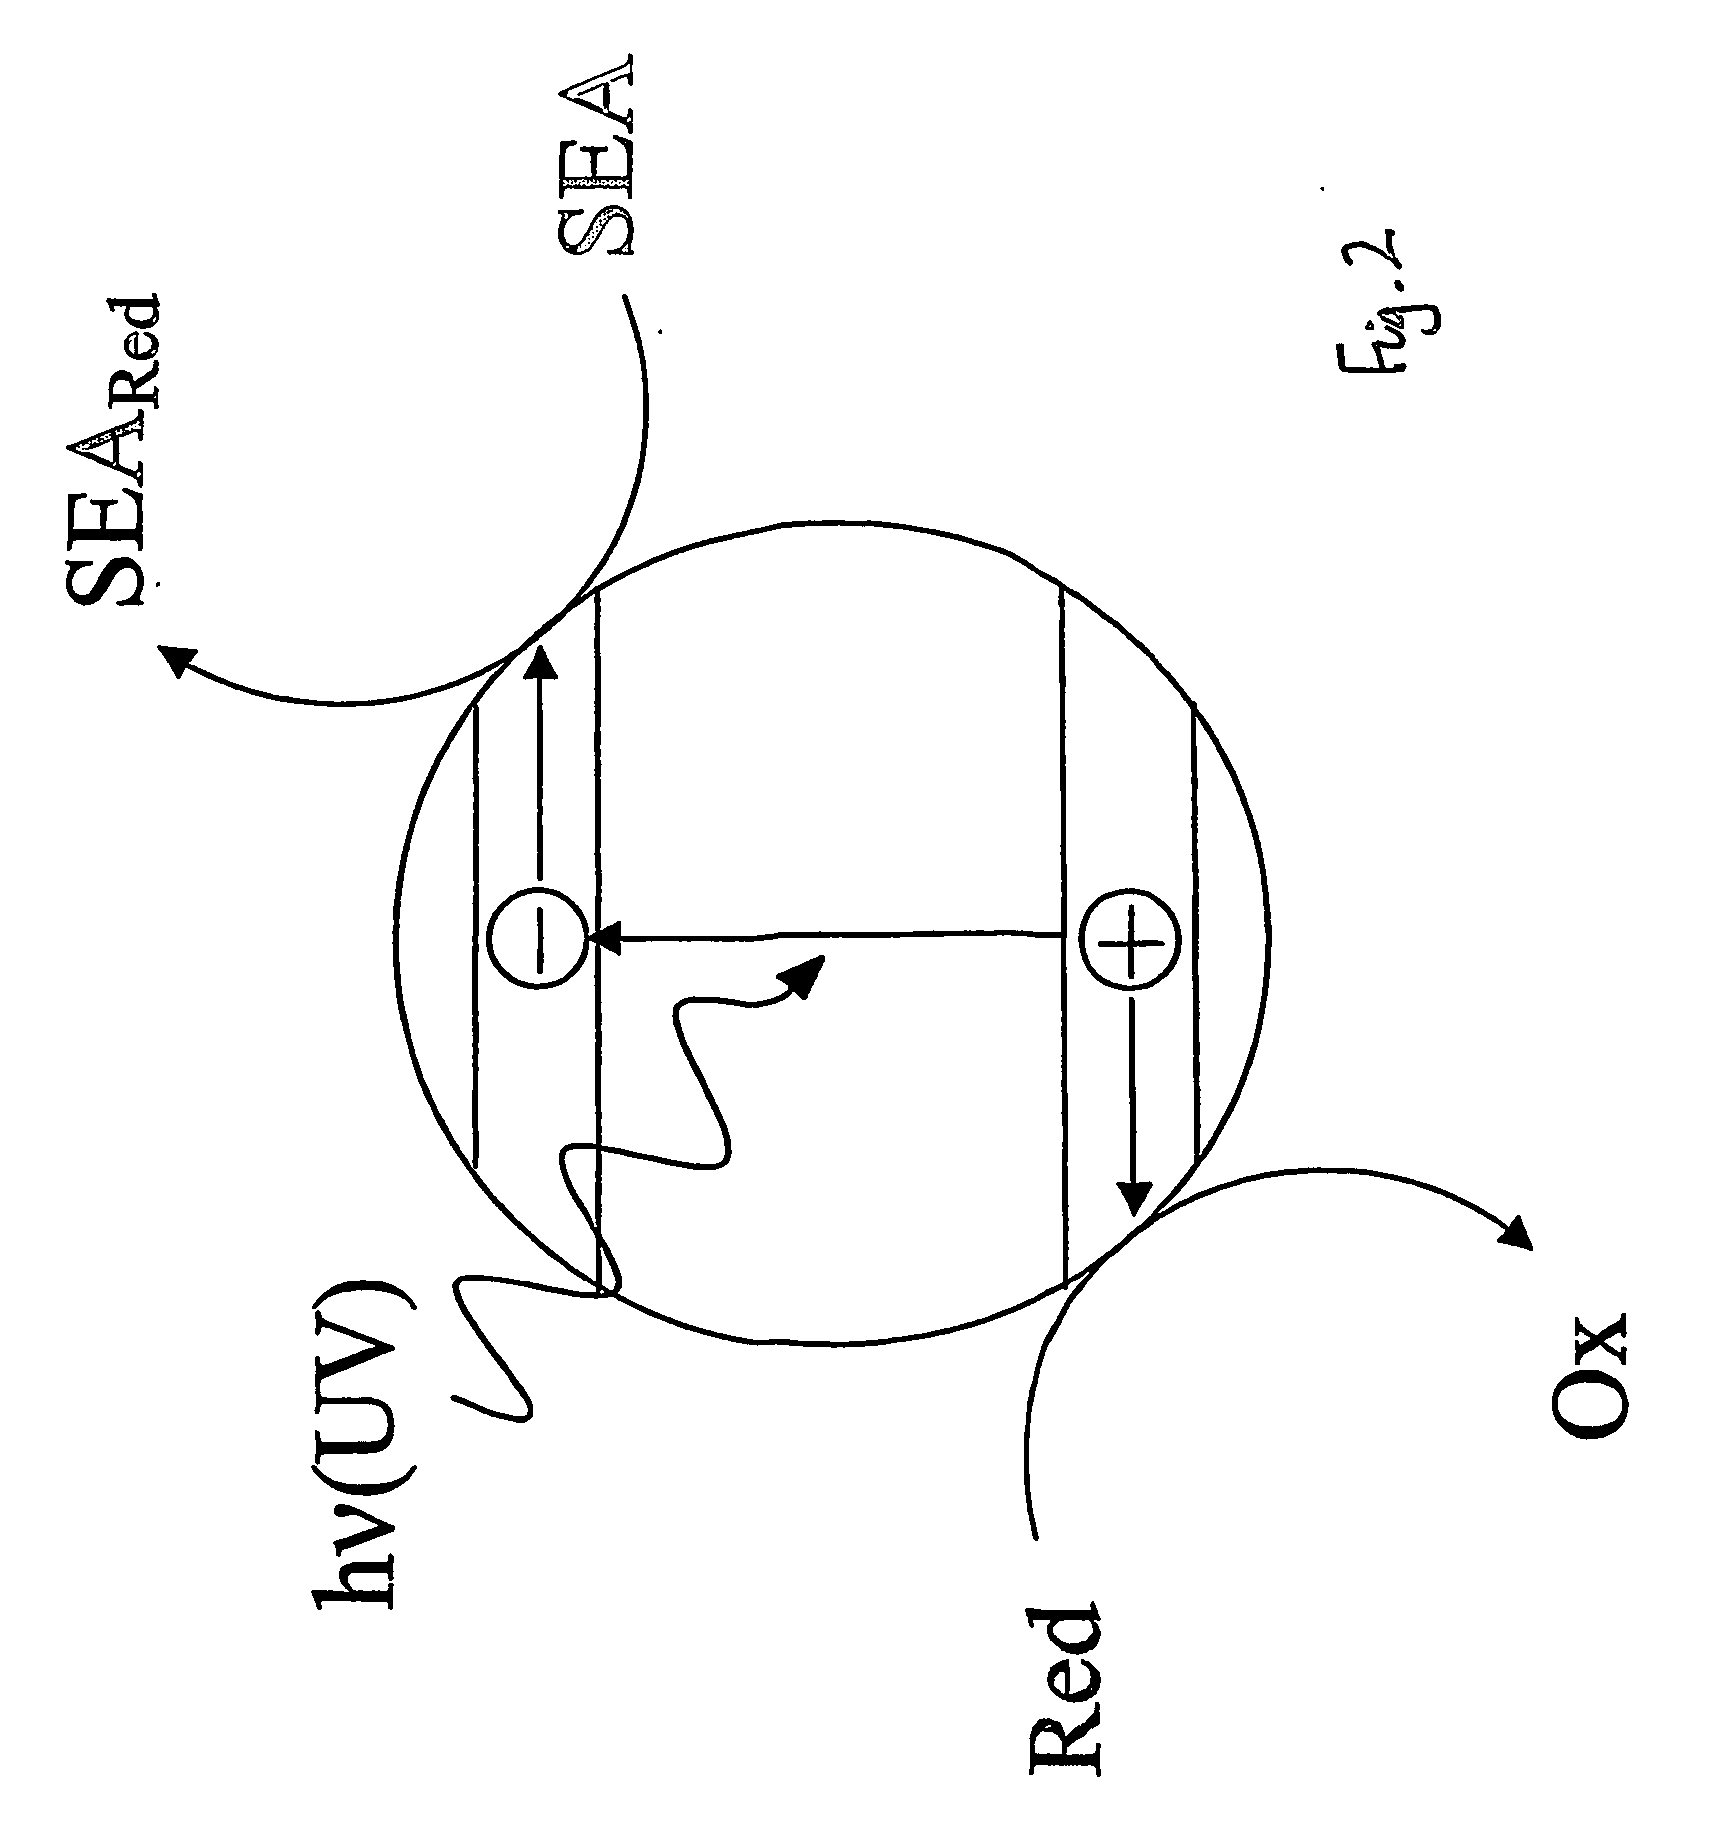 Indicator for detecting a photocatalyst